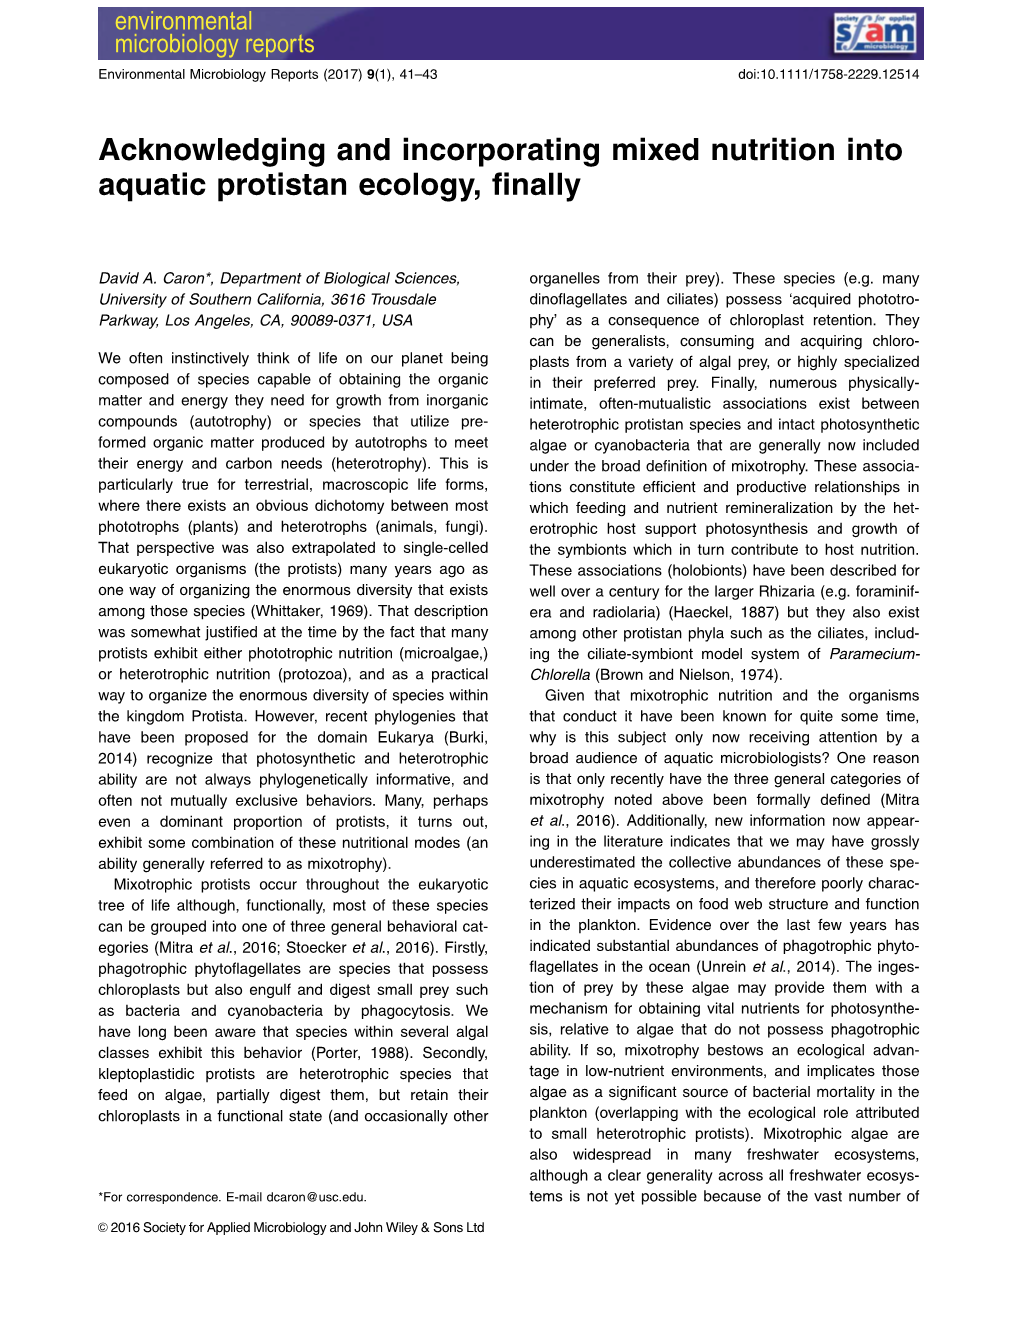 Acknowledging and Incorporating Mixed Nutrition Into Aquatic Protistan Ecology, Finally